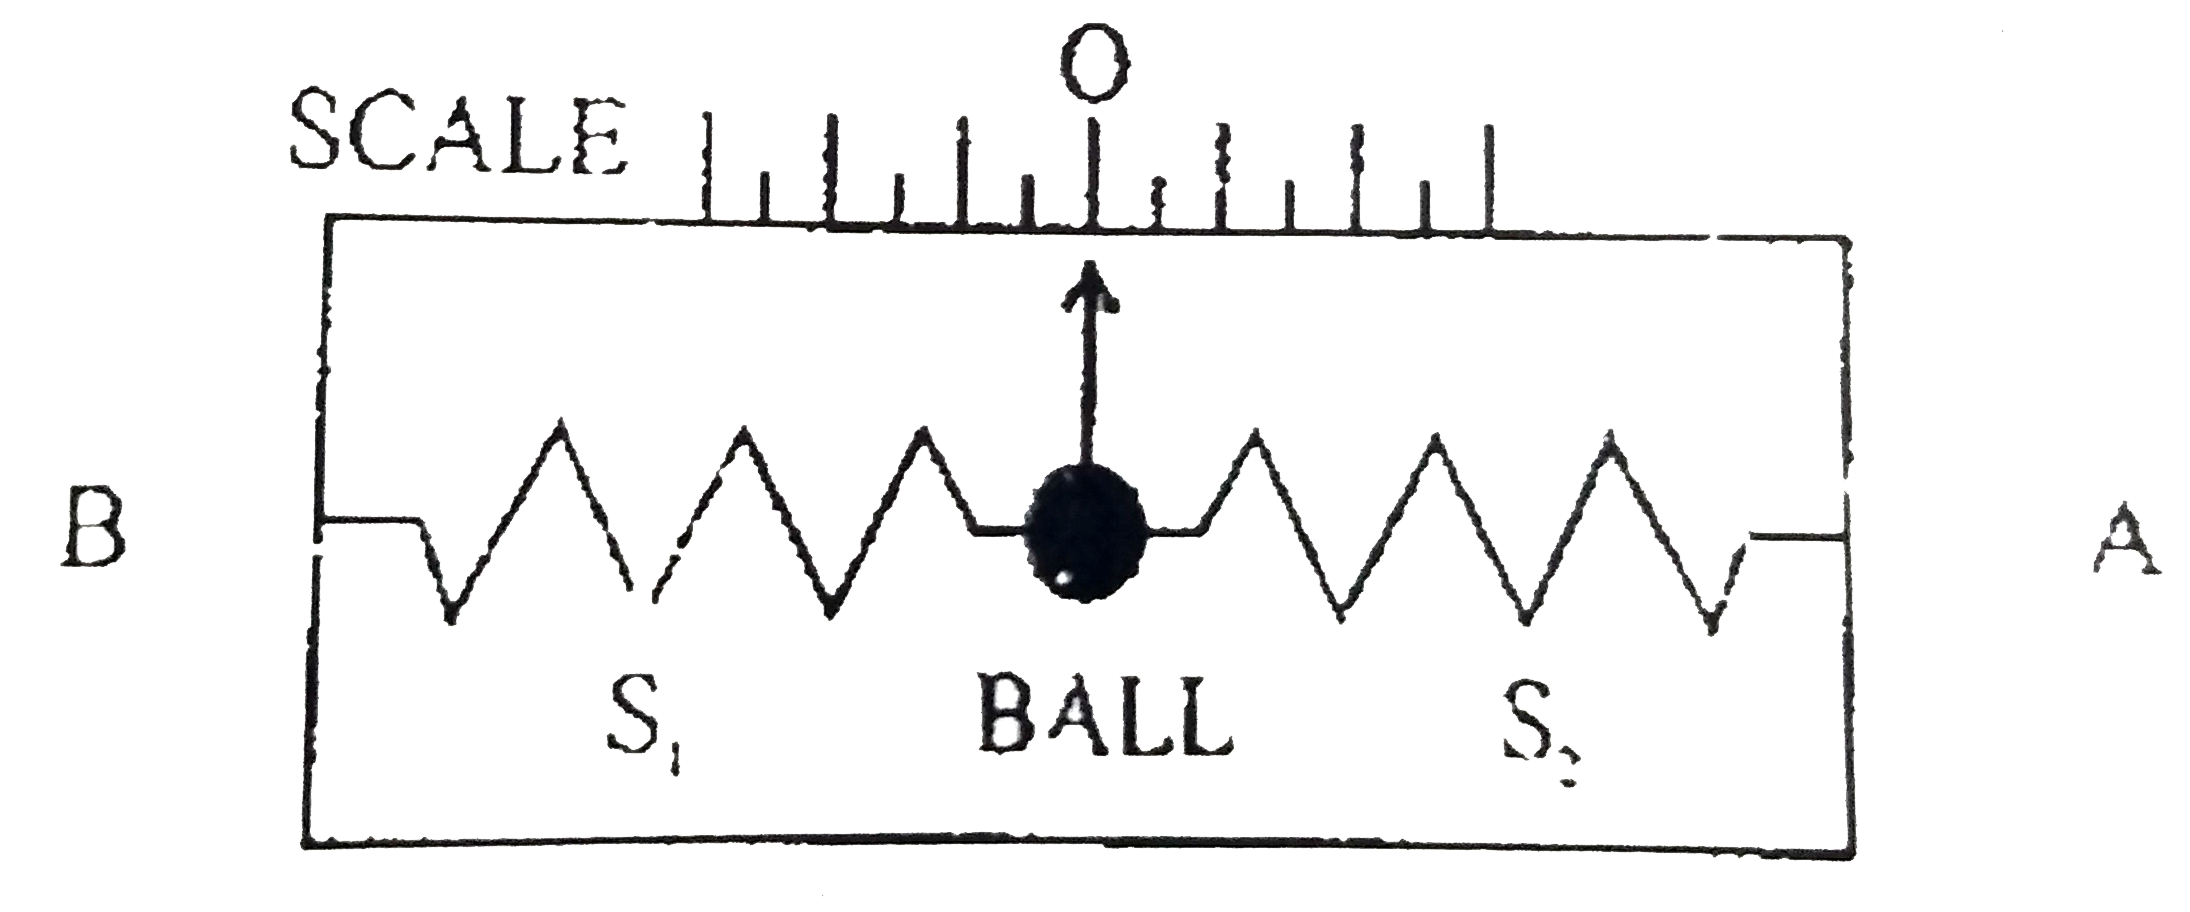 The device in figure is an acceleraometer which is fitted to a car. It consist of a spherical ball, mass 0.08 kg, attached to a pointer which can move horizontally against a fixed scale that gives the acceleration of the car, O indicates zero acceleration. On each side of the ball are attached identical springs, S(1) and S(2). that are fixed at their ends. The device is enclosed in a rigid transparent housing. The car accelerates towards A.      If the car starts from rest at time t=0 and travels along a straight road. The accelerometer readings are recorded in table.   {:(